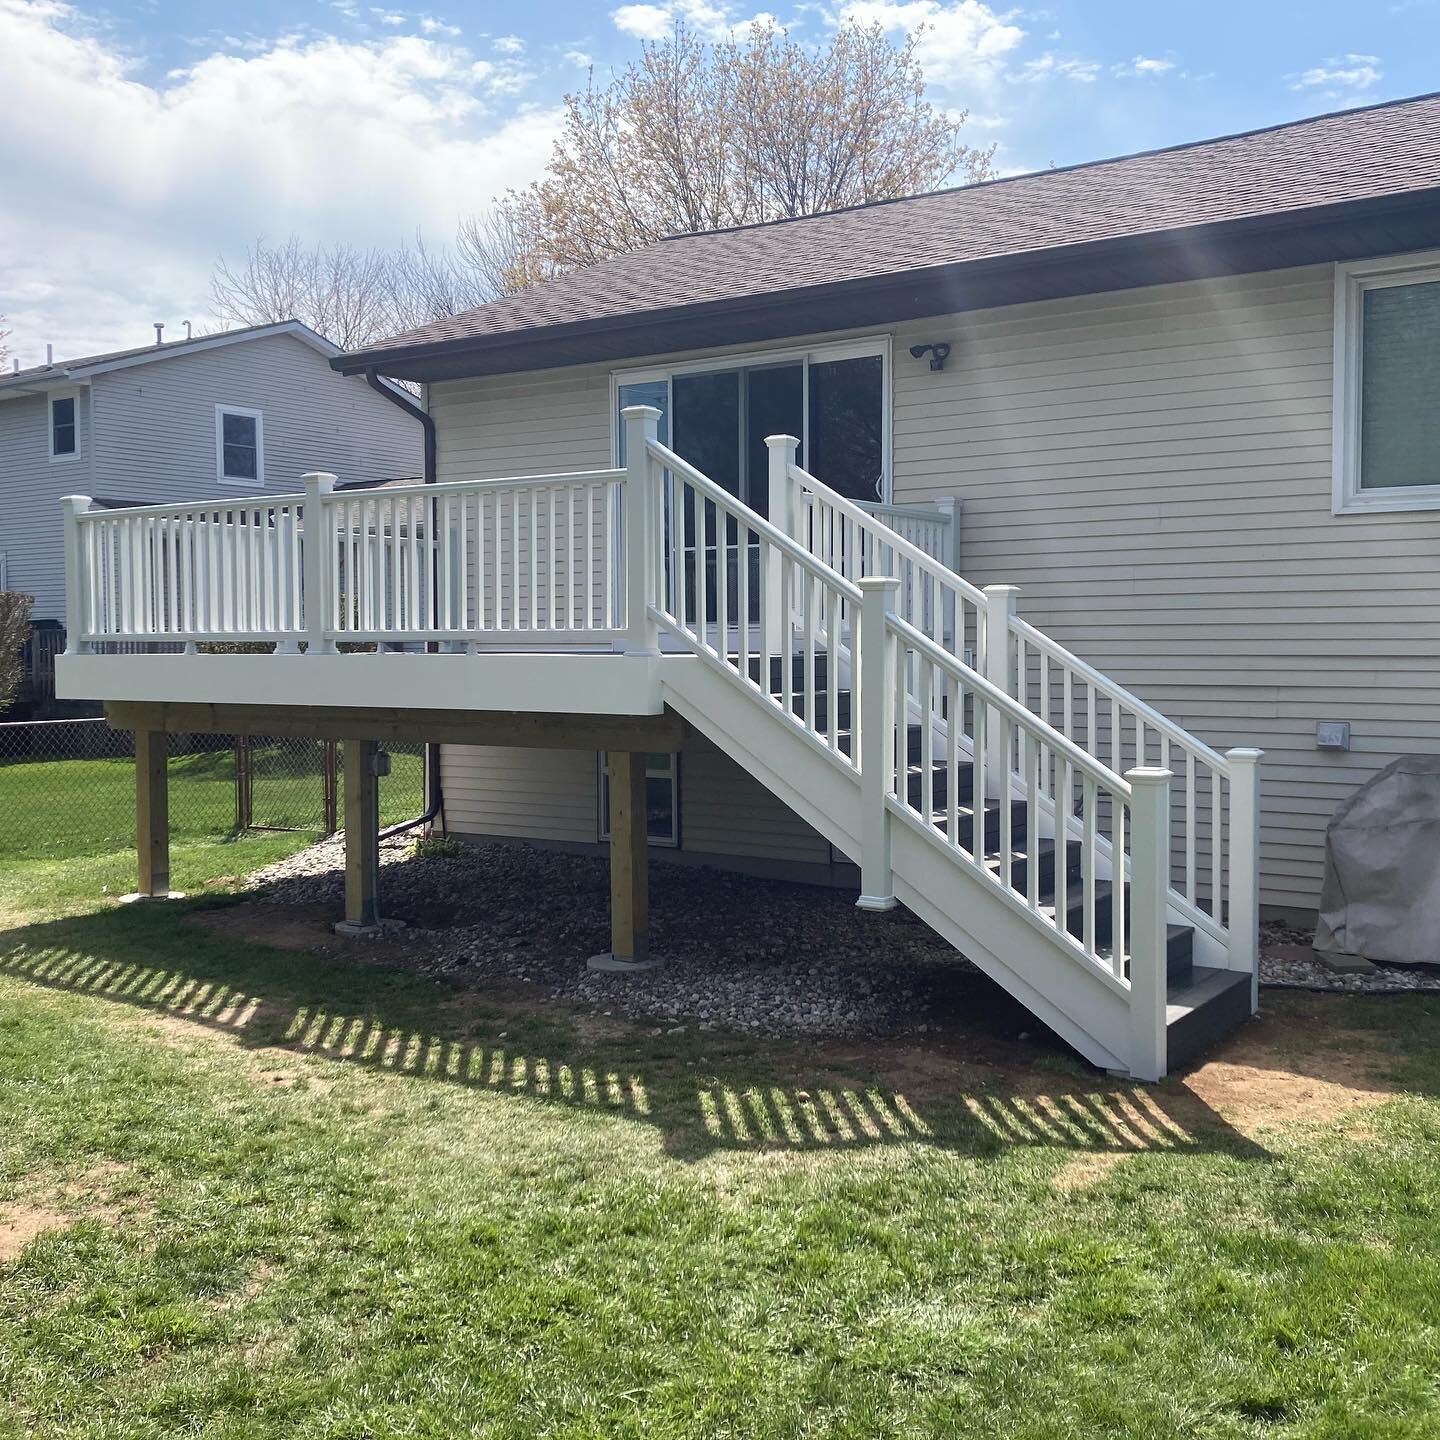 Our latest exterior project! A new deck from the ground up to expand and replace an existing deck that was in disrepair. With @trexcompany decking and railing this will be a super low maintenance deck that will look great for many years to come!

#fl